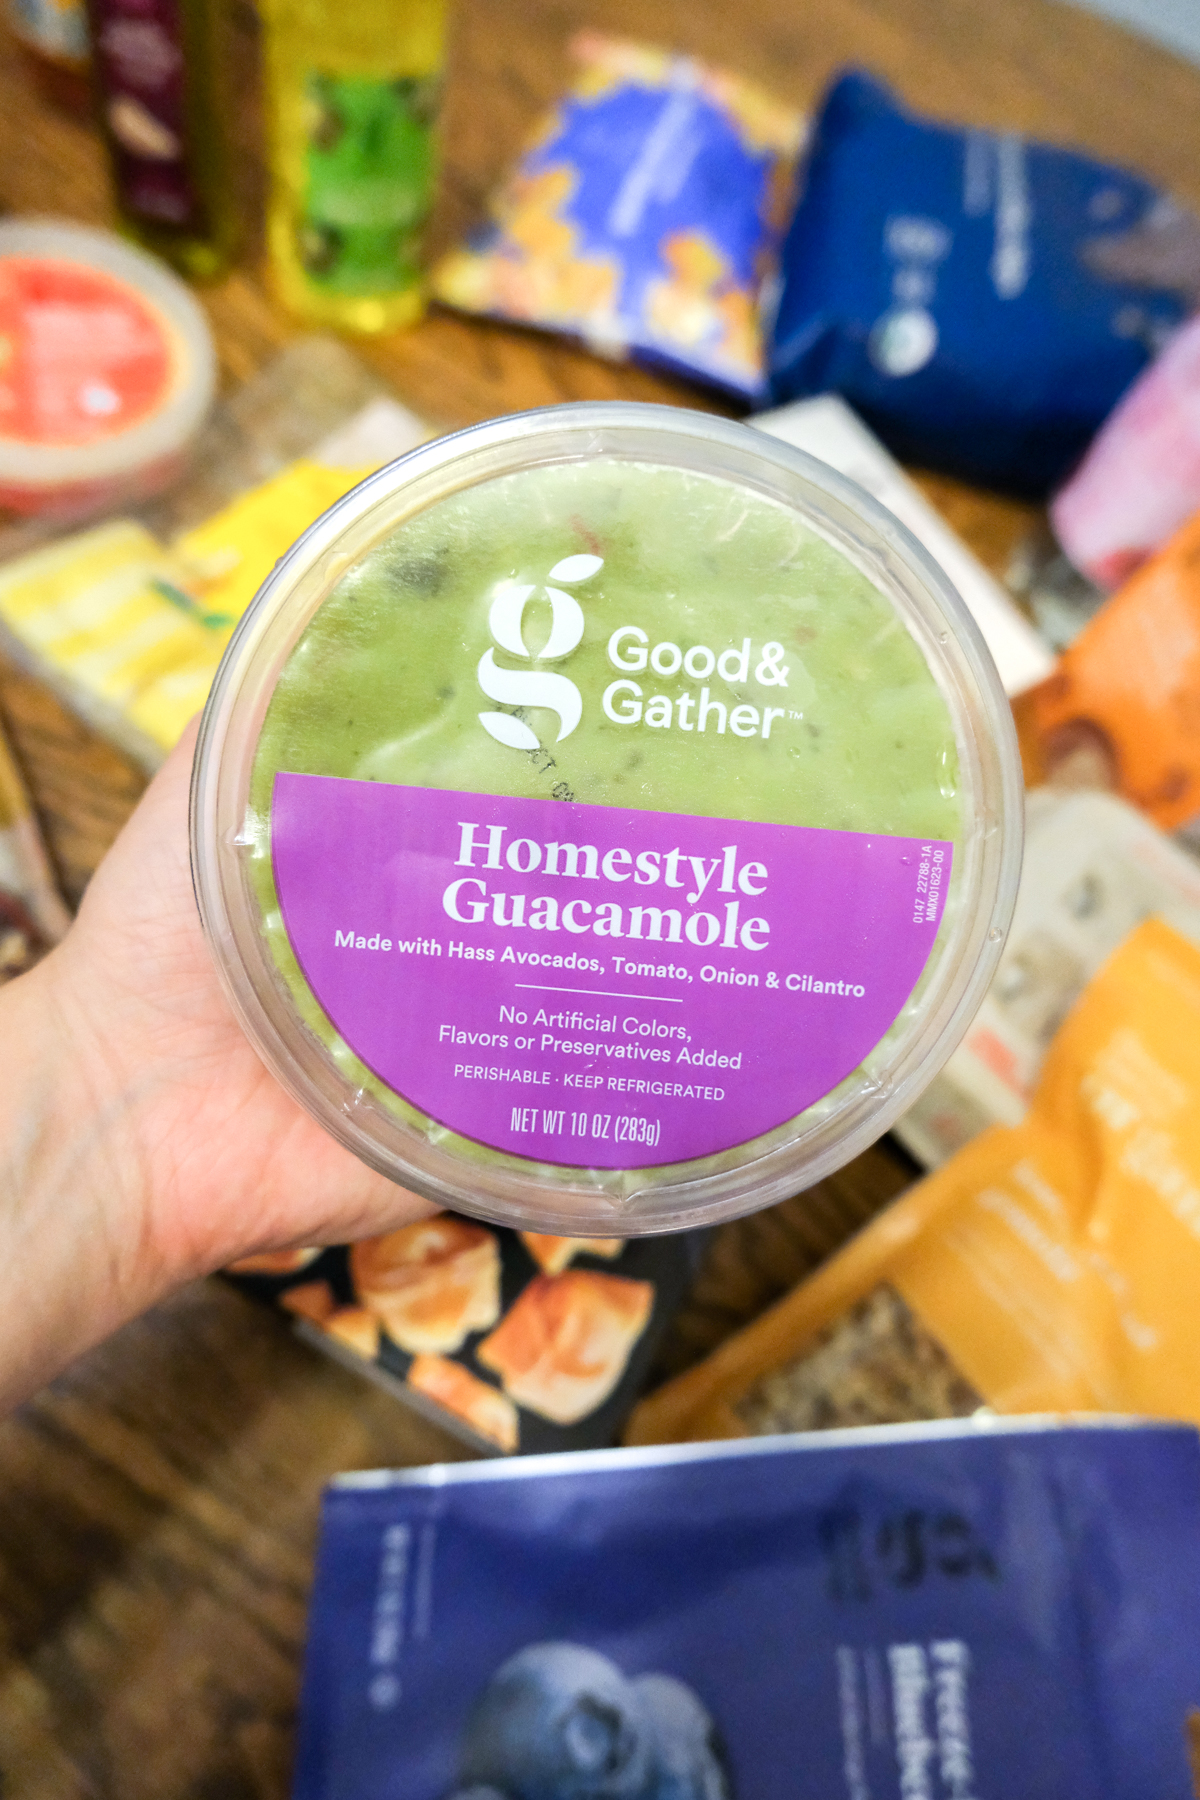 homestyle guacamole Good & Gather from Target